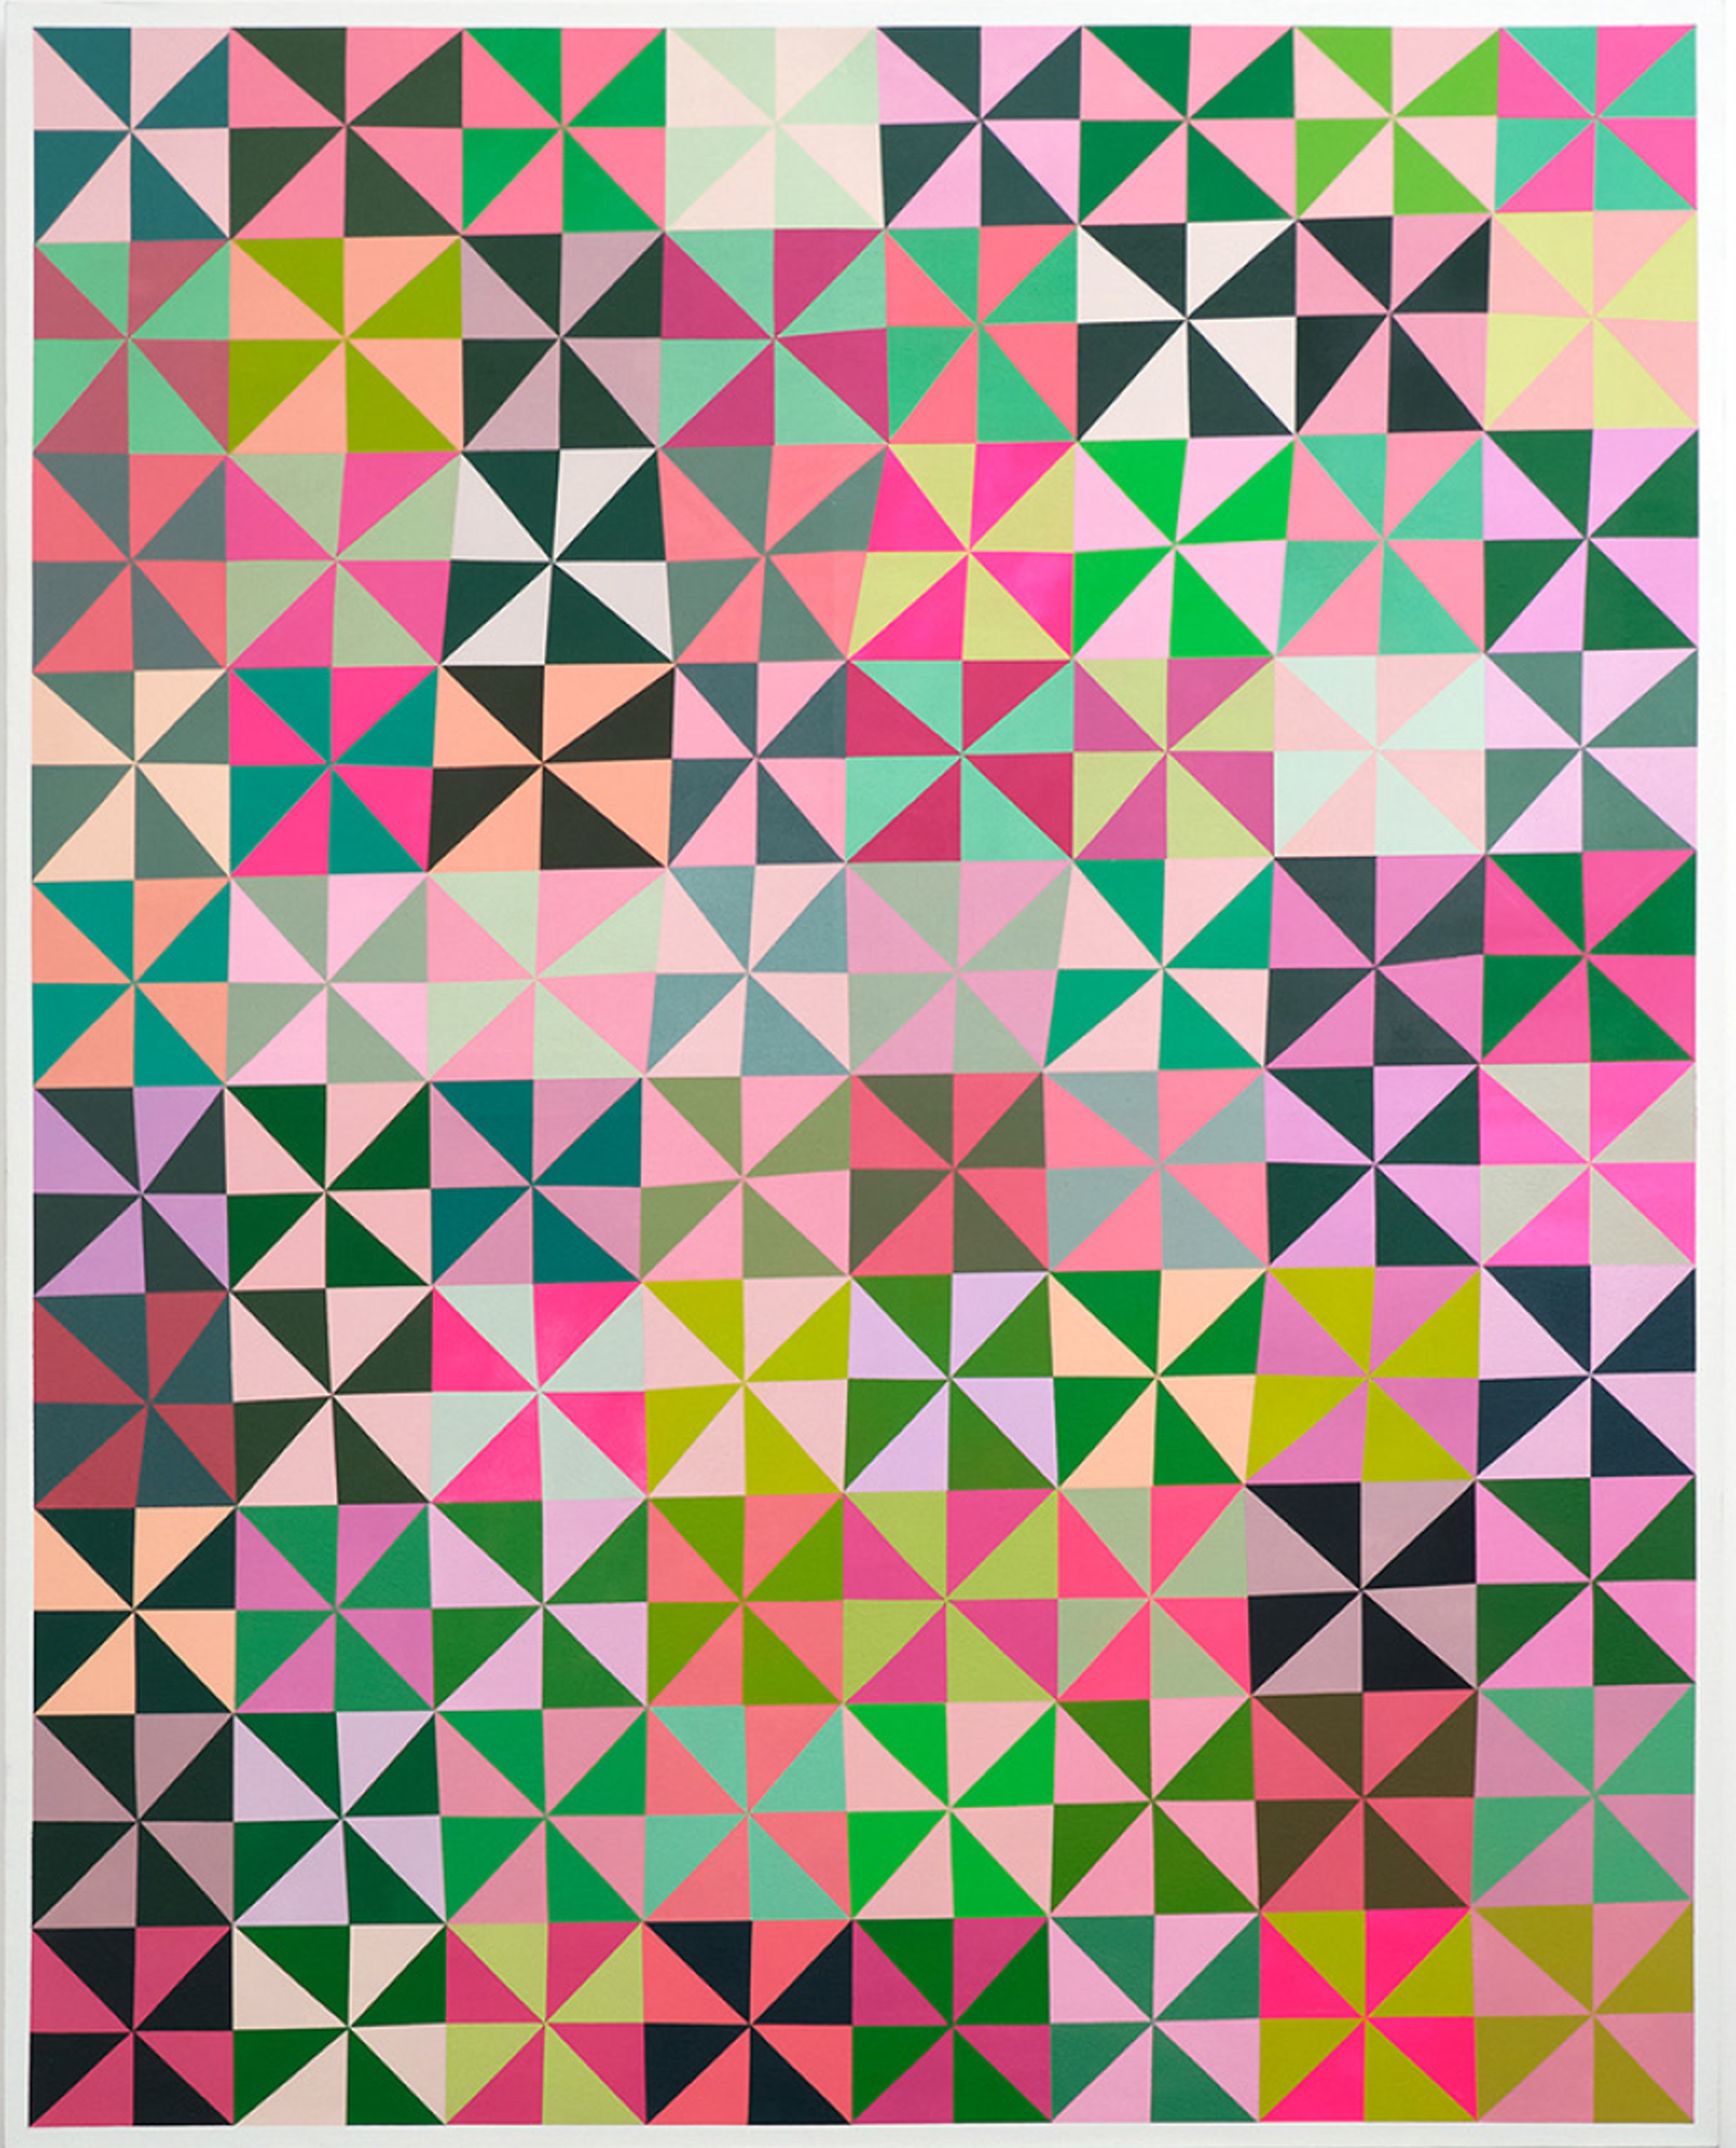 Untitled (Large 80 Pink & Green Pinwheel Grid) by Christopher Cascio